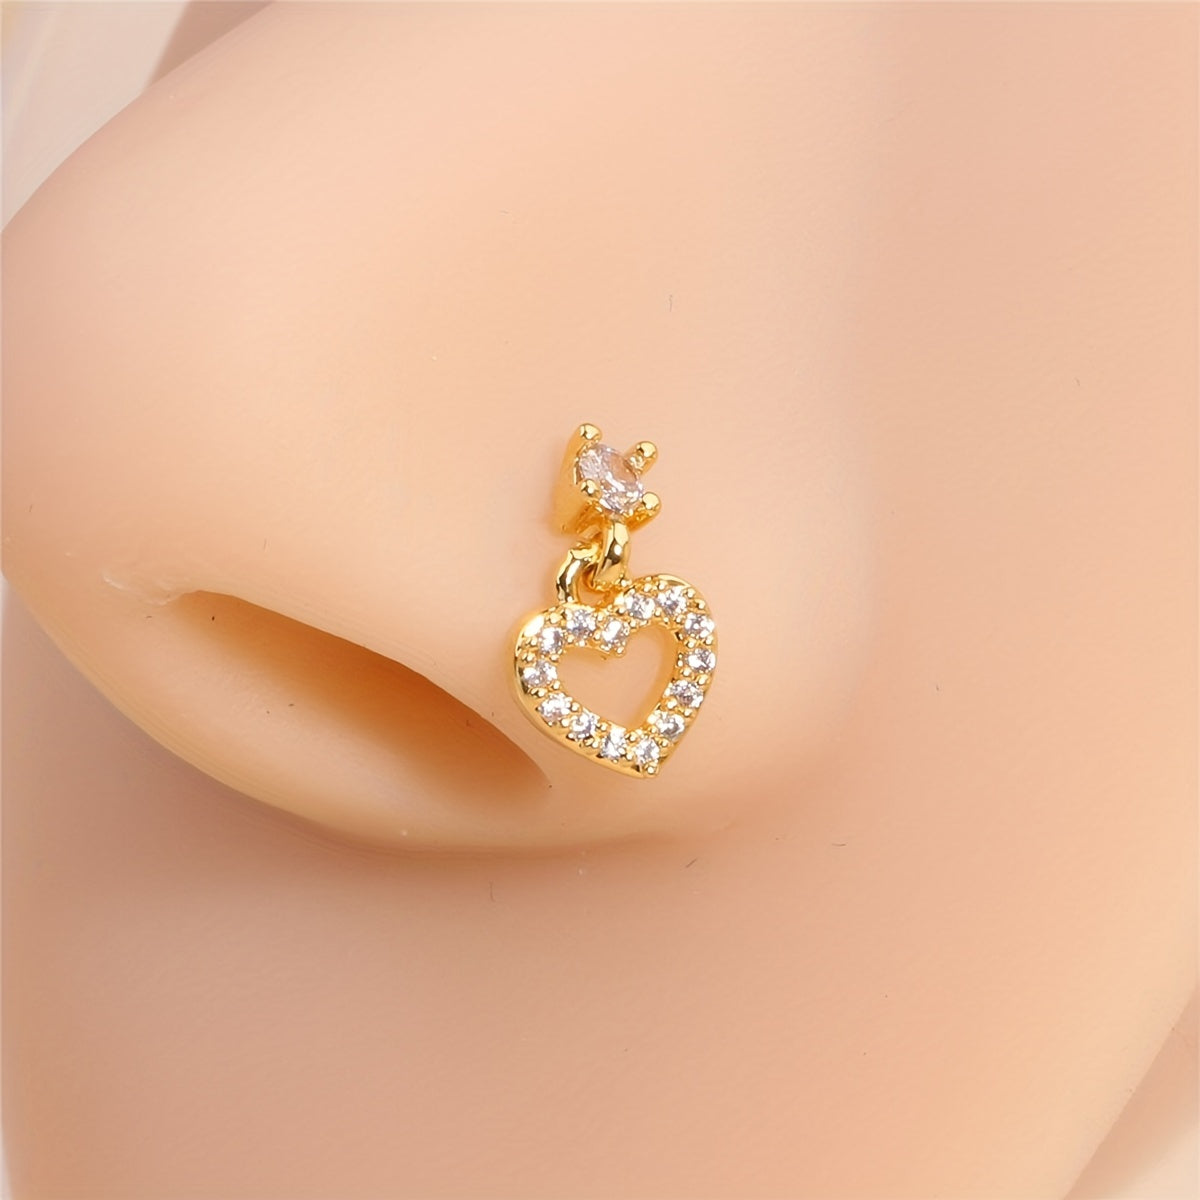 Hollow Love Heart Pendant Nose Stud Ring Inlaid Shiny Zircon For Women Body Piercing Jewelry